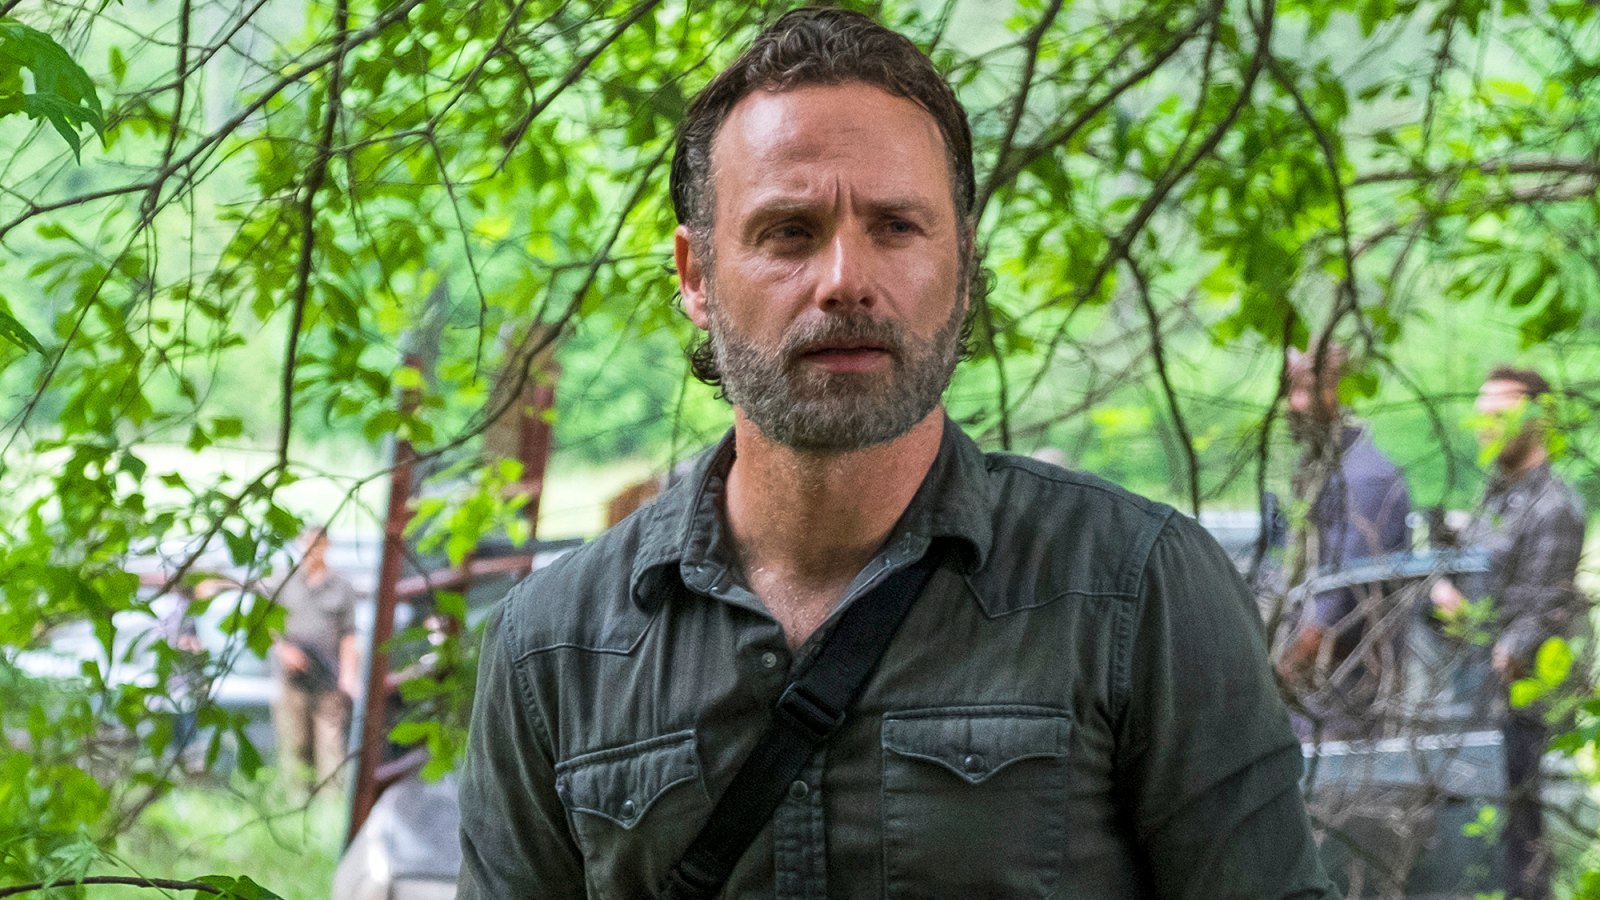 Andrew Lincoln as Rick Grimes, The Walking Dead Season 8.